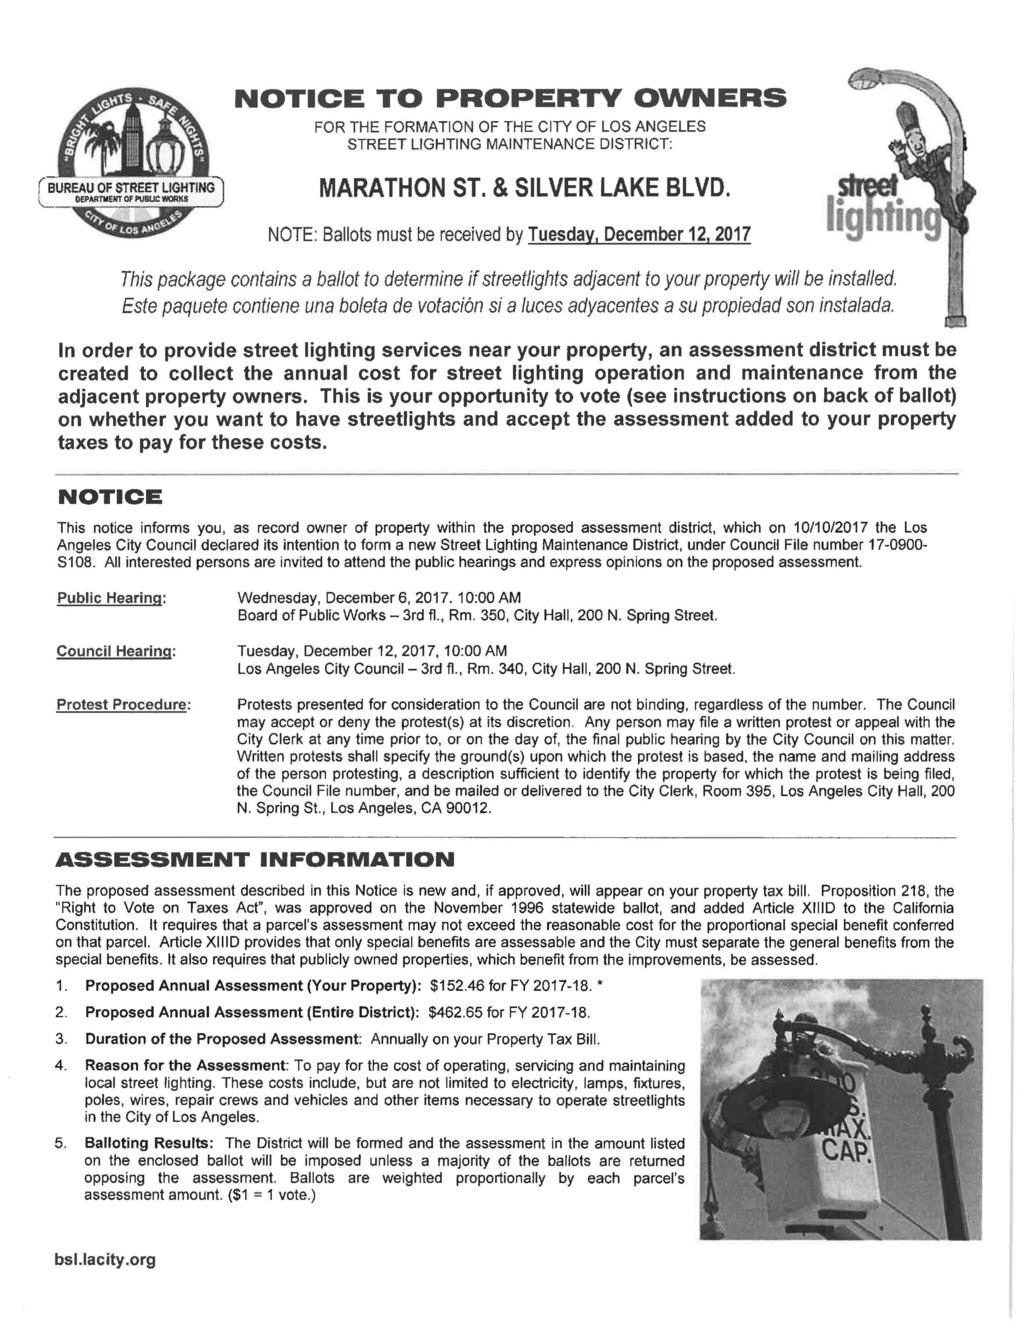 NOTICE TO PROPERTY OWNERS FOR THE FORMATION OF THE CITY OF LOS ANGELES STREET LIGHTING MAINTENANCE DISTRICT: f BUREAU OF STREET LIGHTING l DEPARTMENT OF PUBLIC WORKS MARATHON ST. & SILVER LAKE BLVD.